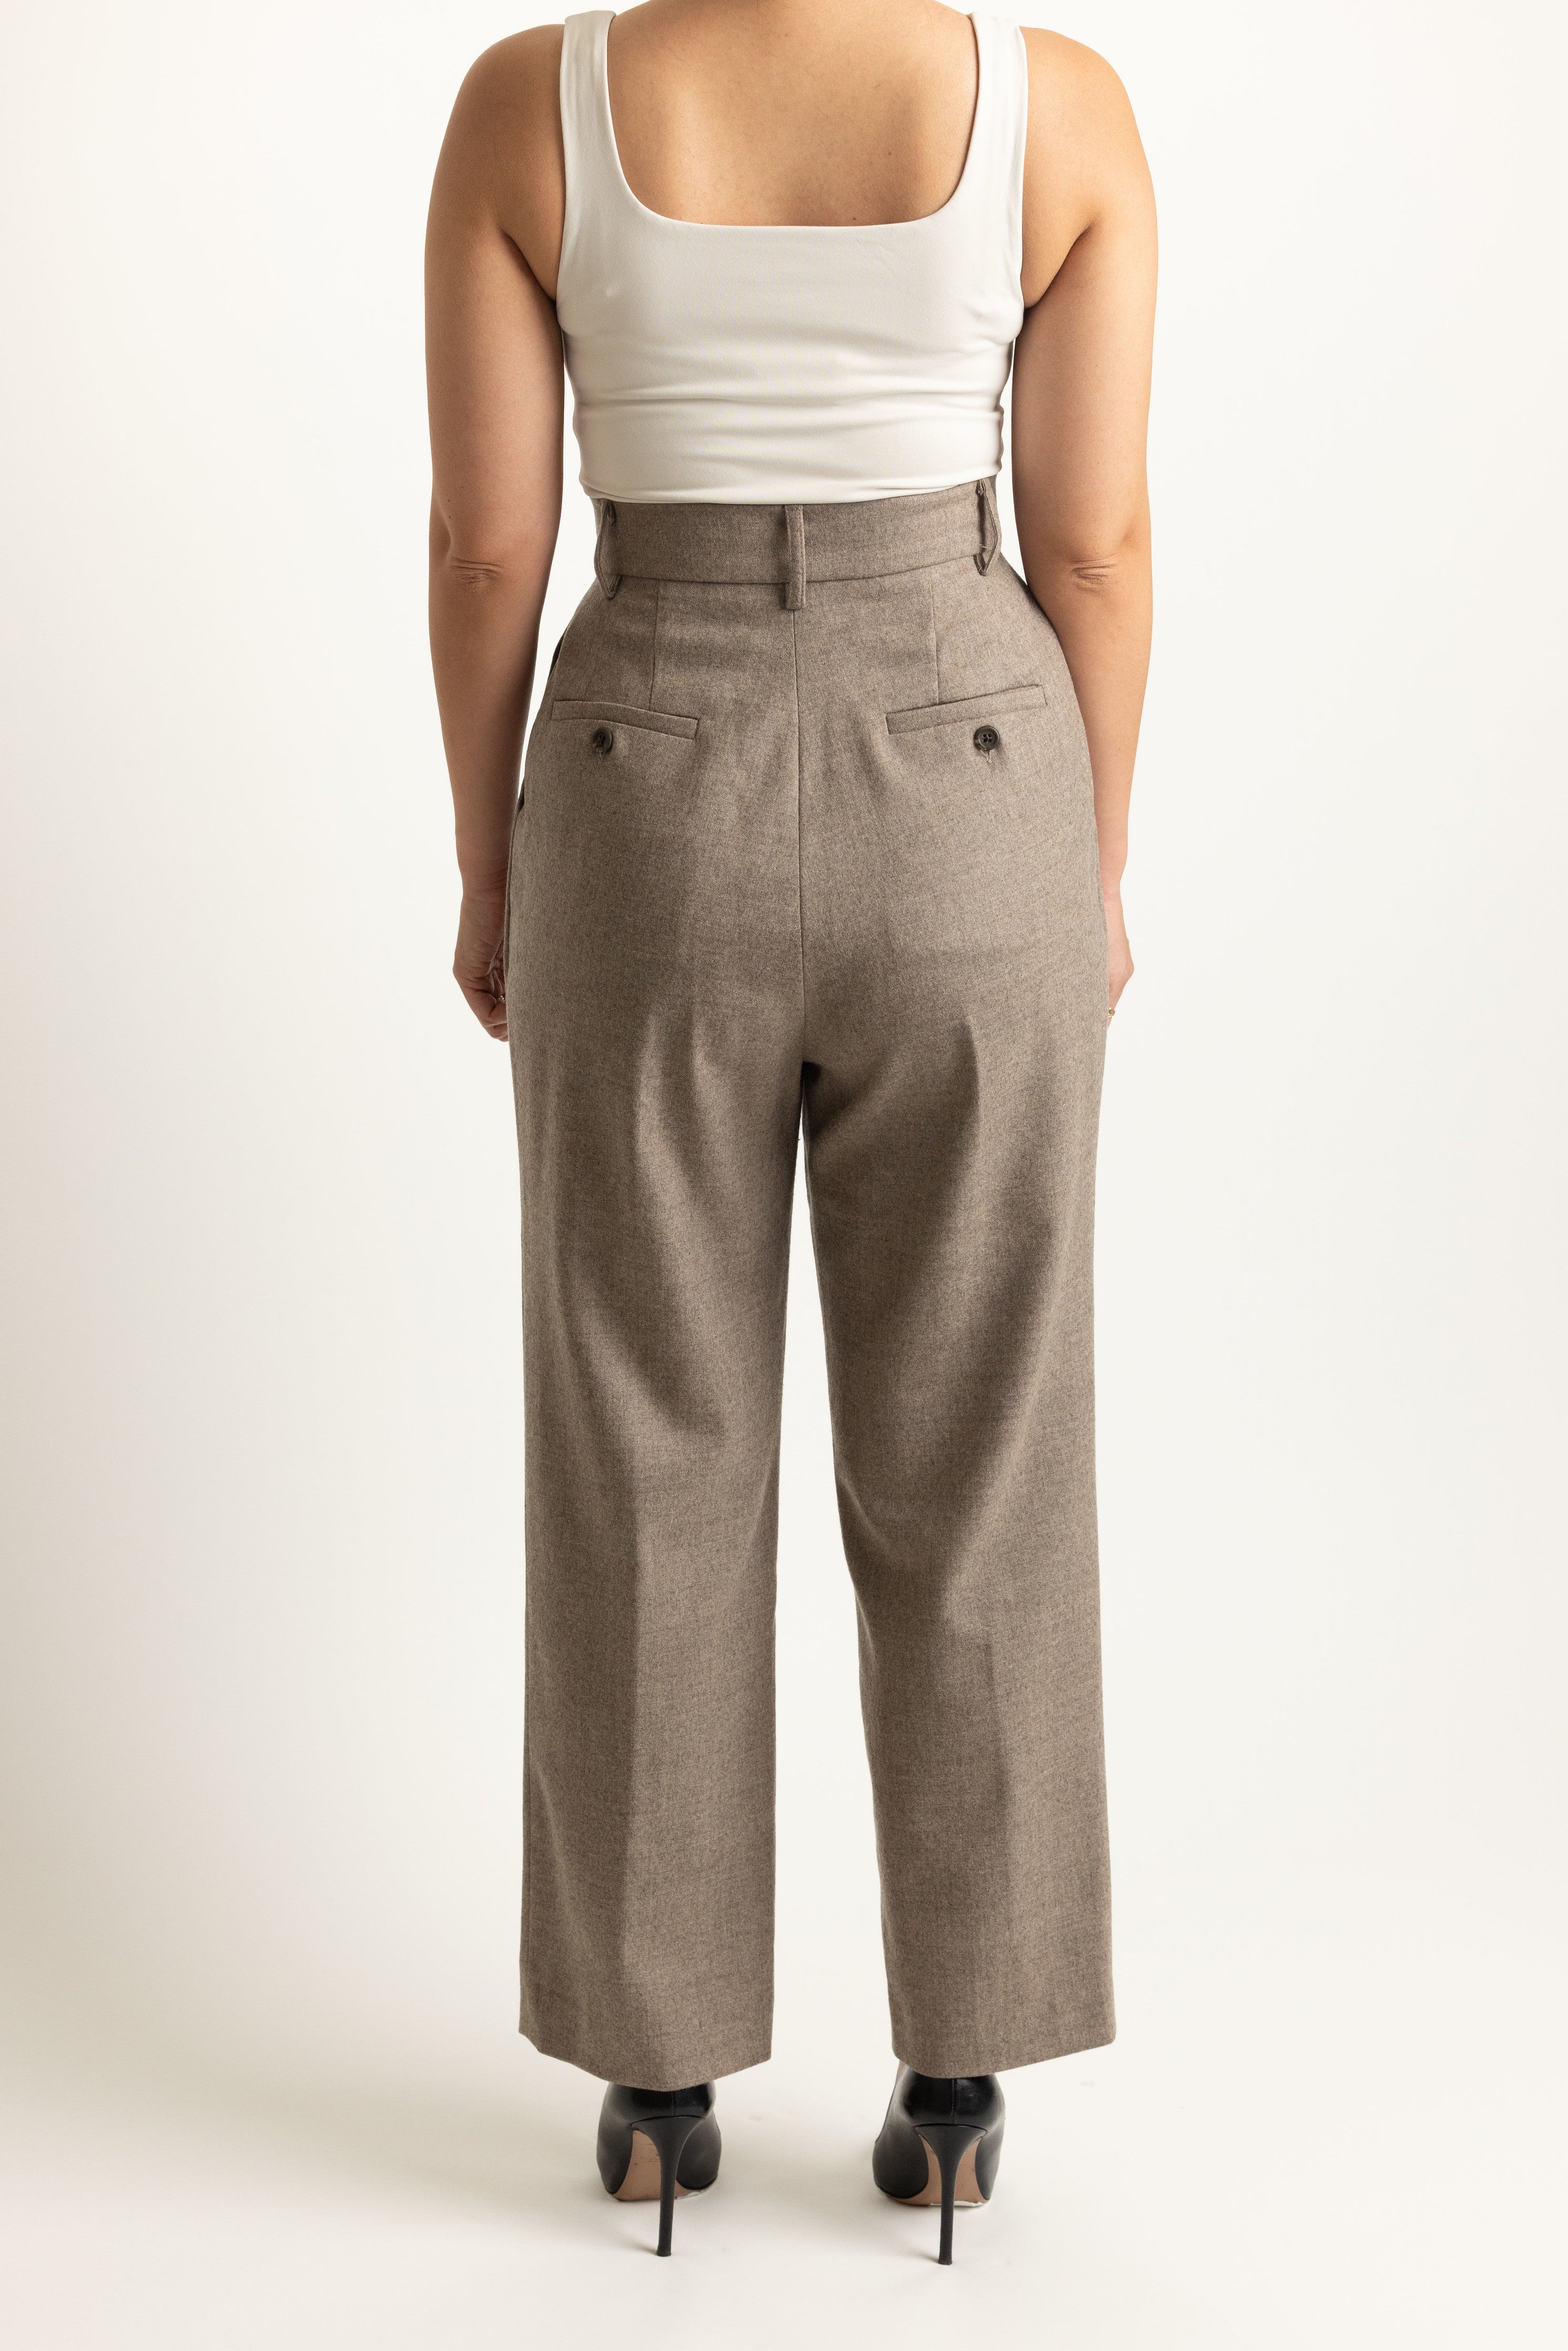 Trial Trouser in Coffee - back view